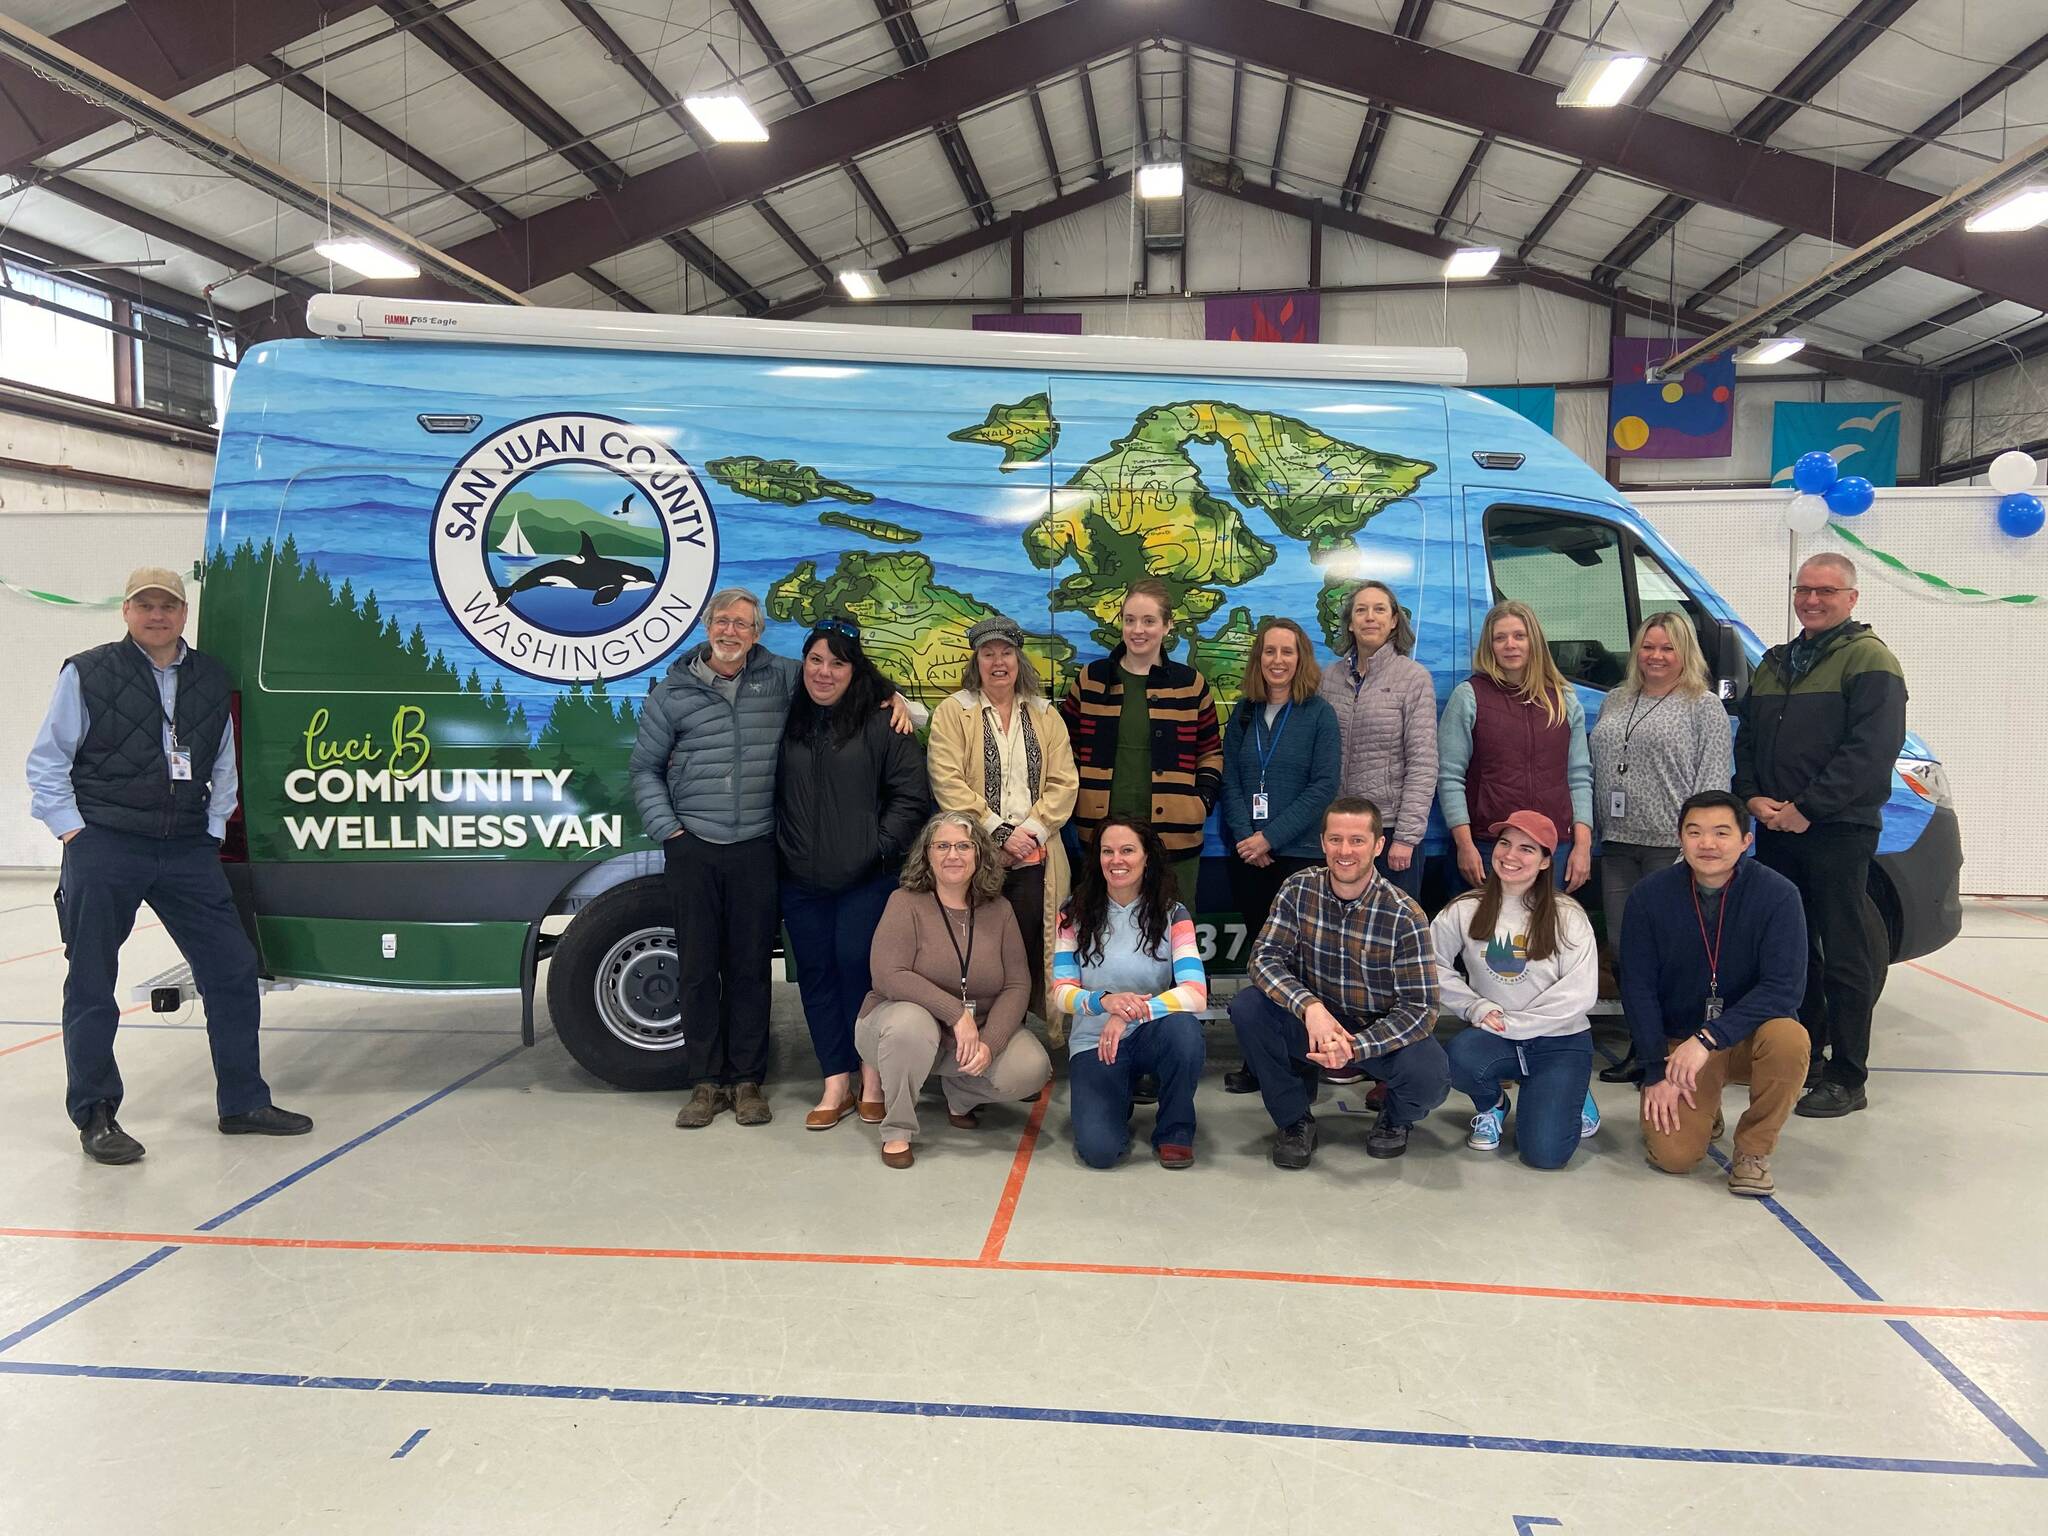 Contributed photo
San Juan County Health and Community Services staff pose with the County's new Community Wellness Van "Lucy B." Staff include (l-r): Back: Kyle Dodd, Dr. Frank James, Stephane Stookey, Lori LeCount, Jessica Nye, Kristen Rezabek, Melinda Hallen, Zoe Froyland, Jessica Moseley, and Mark Tompkins. Front: Emily Mason, Nicole Givan, Ethan Schmidt, Melody Smith, and Kirk Sato.